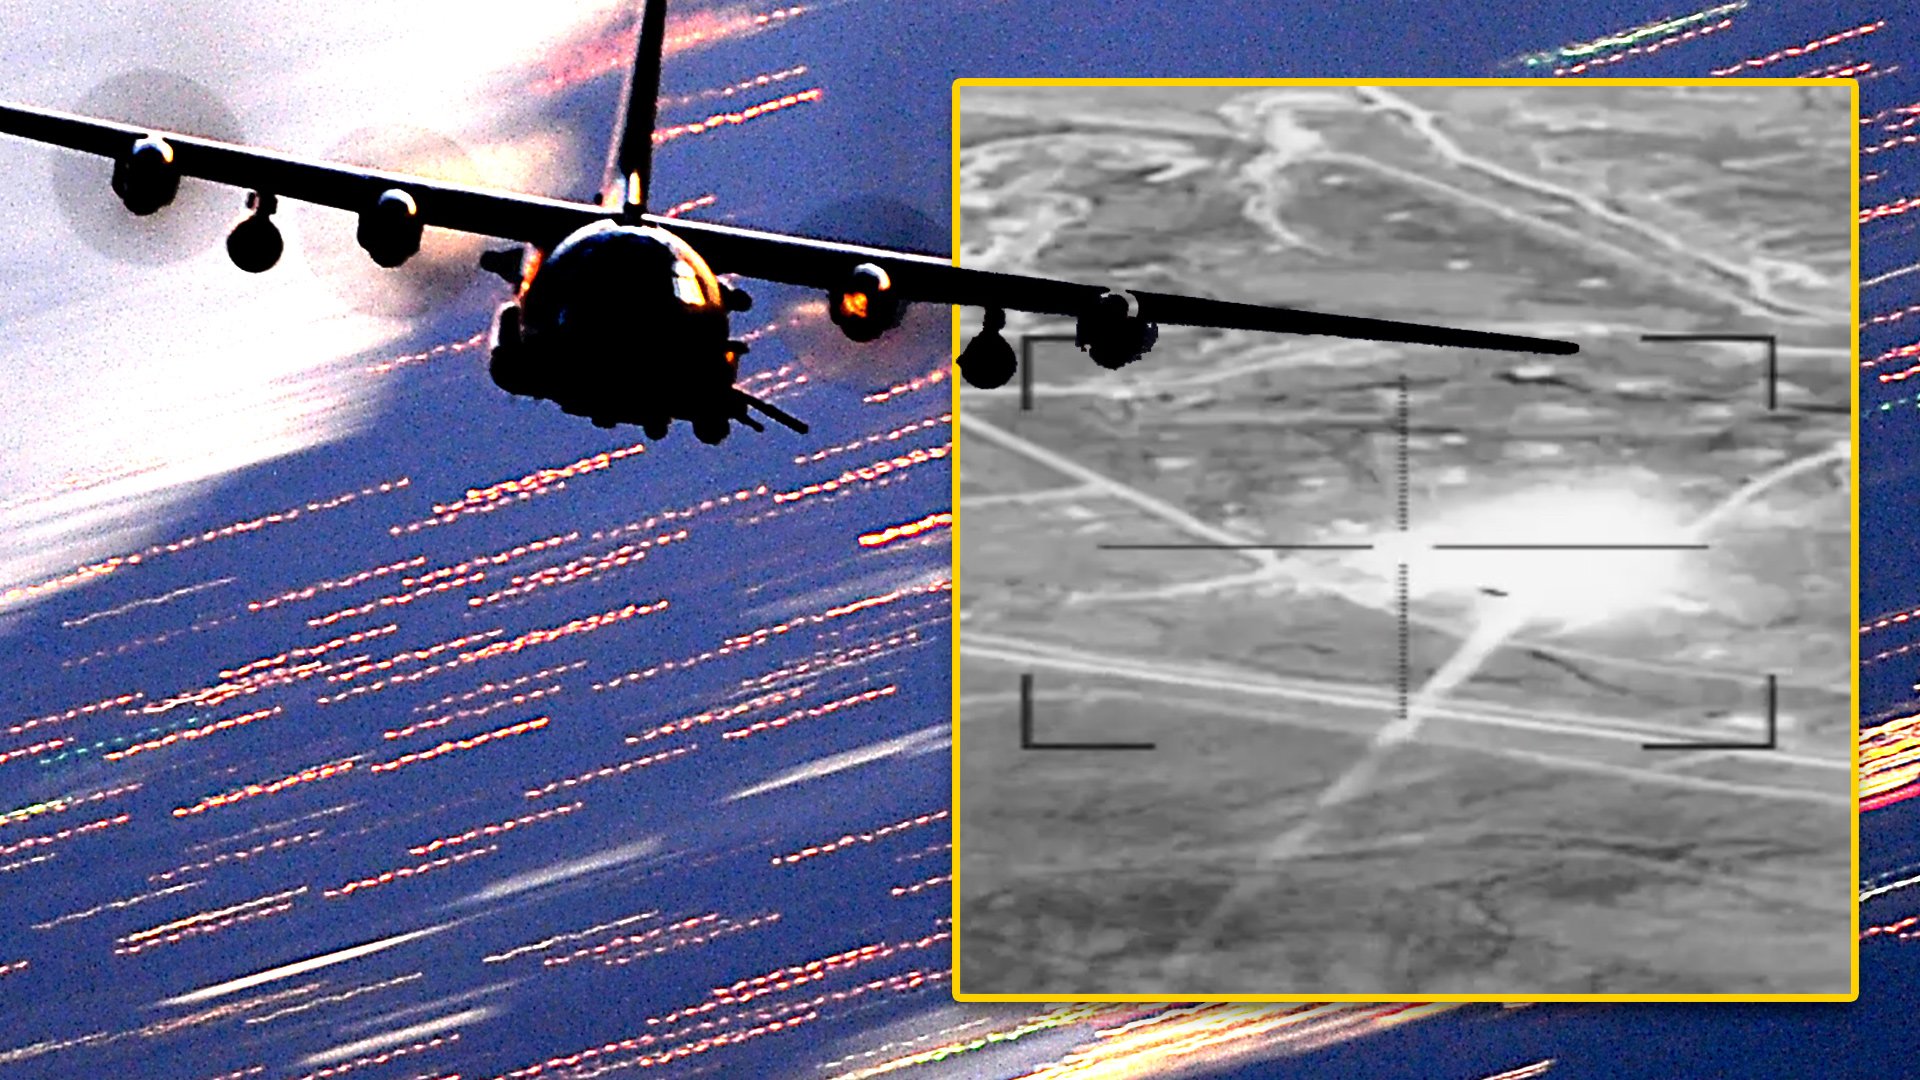 US forces used AC-130 gunships, AH-64 attack helicopters and 150mm M777 artillery cannons to attack Iranian-backed militias in Syria after a series of escalating attacks against US outposts there. Screen capture of US strikes from video released by US Centcom. Air Force photo by Master Sgt. Jeremy Lock.